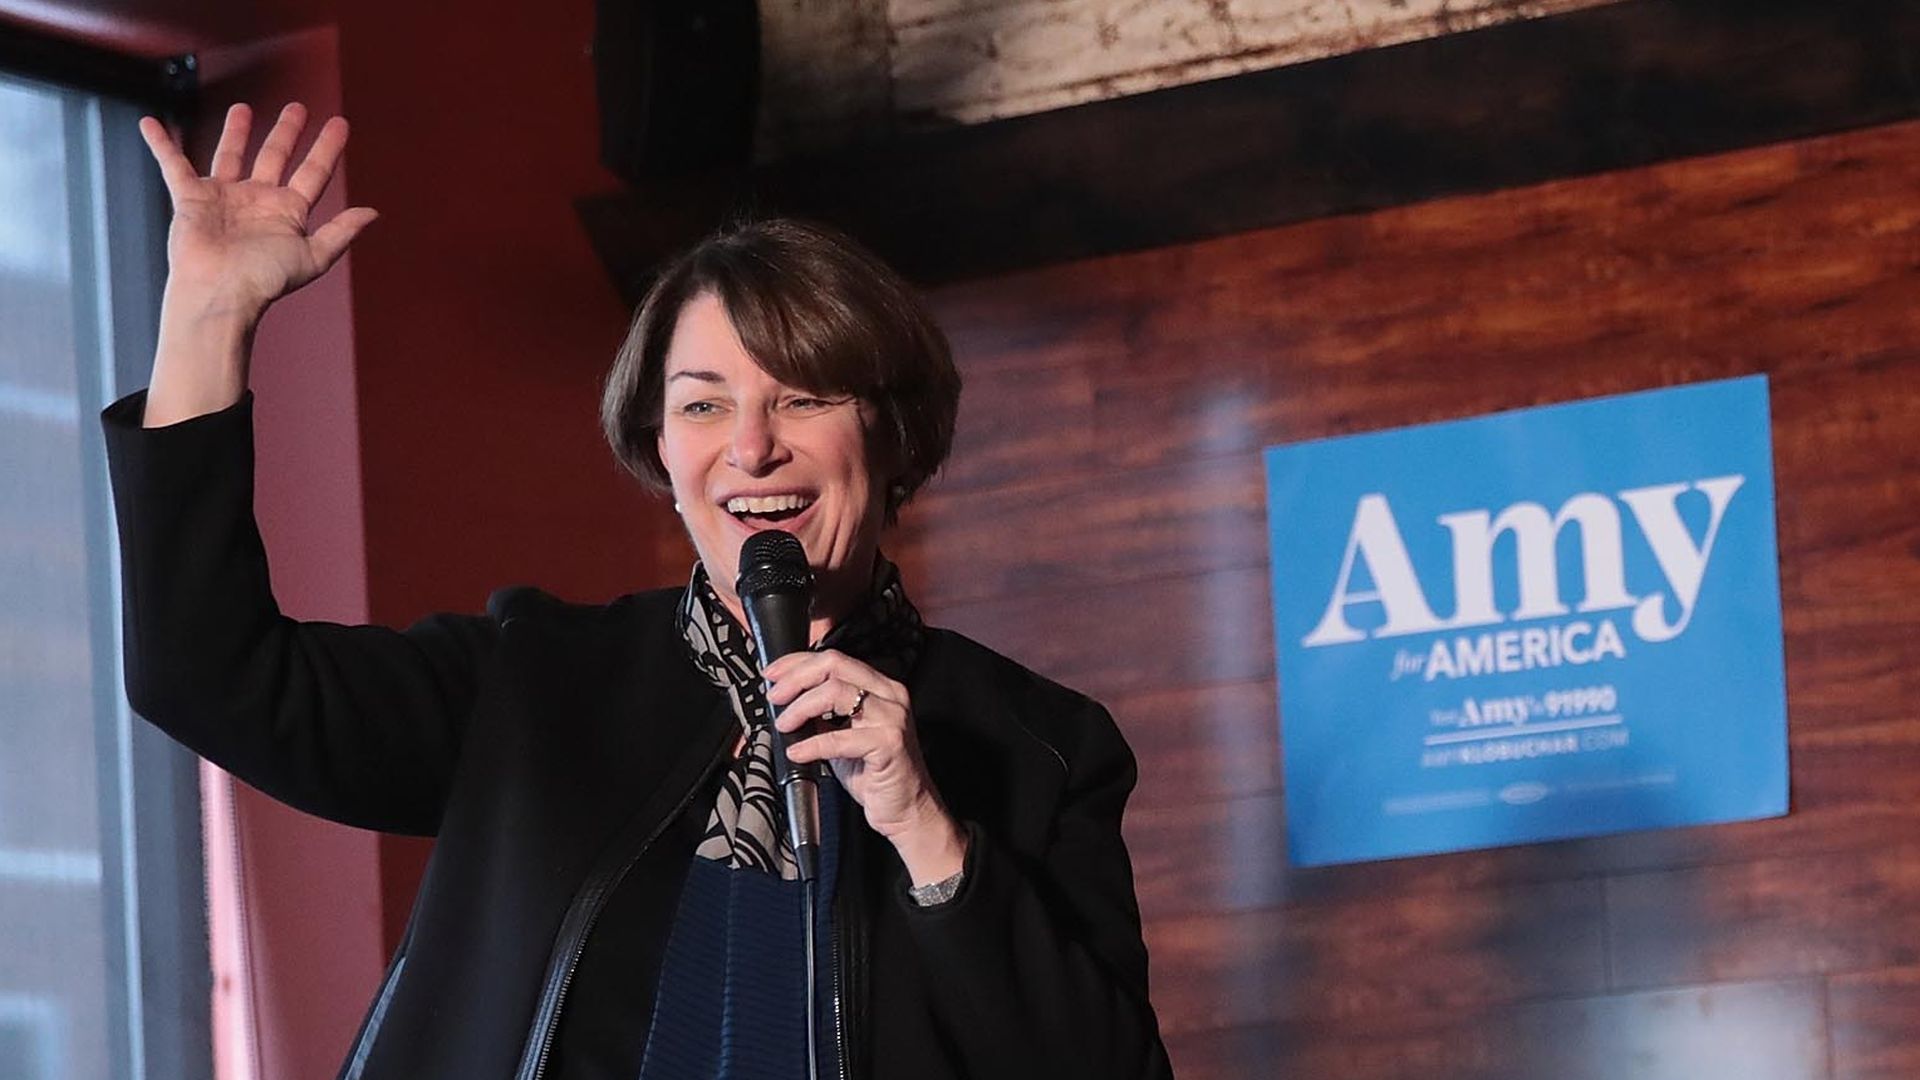  Sen. Amy Klobuchar has come under intense scrutiny for the way she treats staff since announcing her presidential bid.